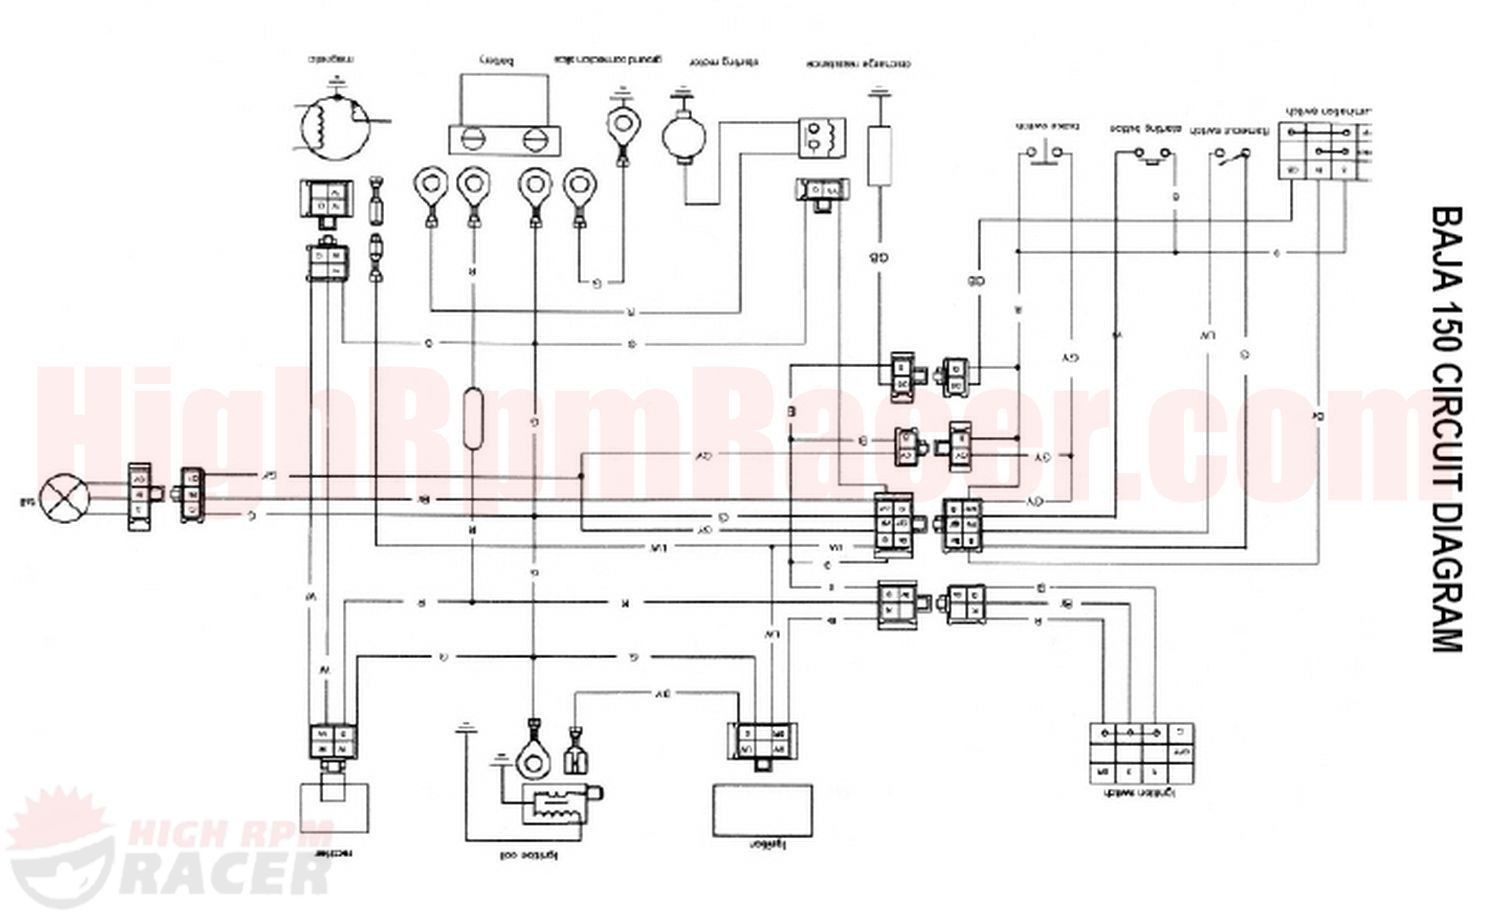 Outstanding Wiring Diagram For Tao 110cc 4 Wheeler And 125 Atv